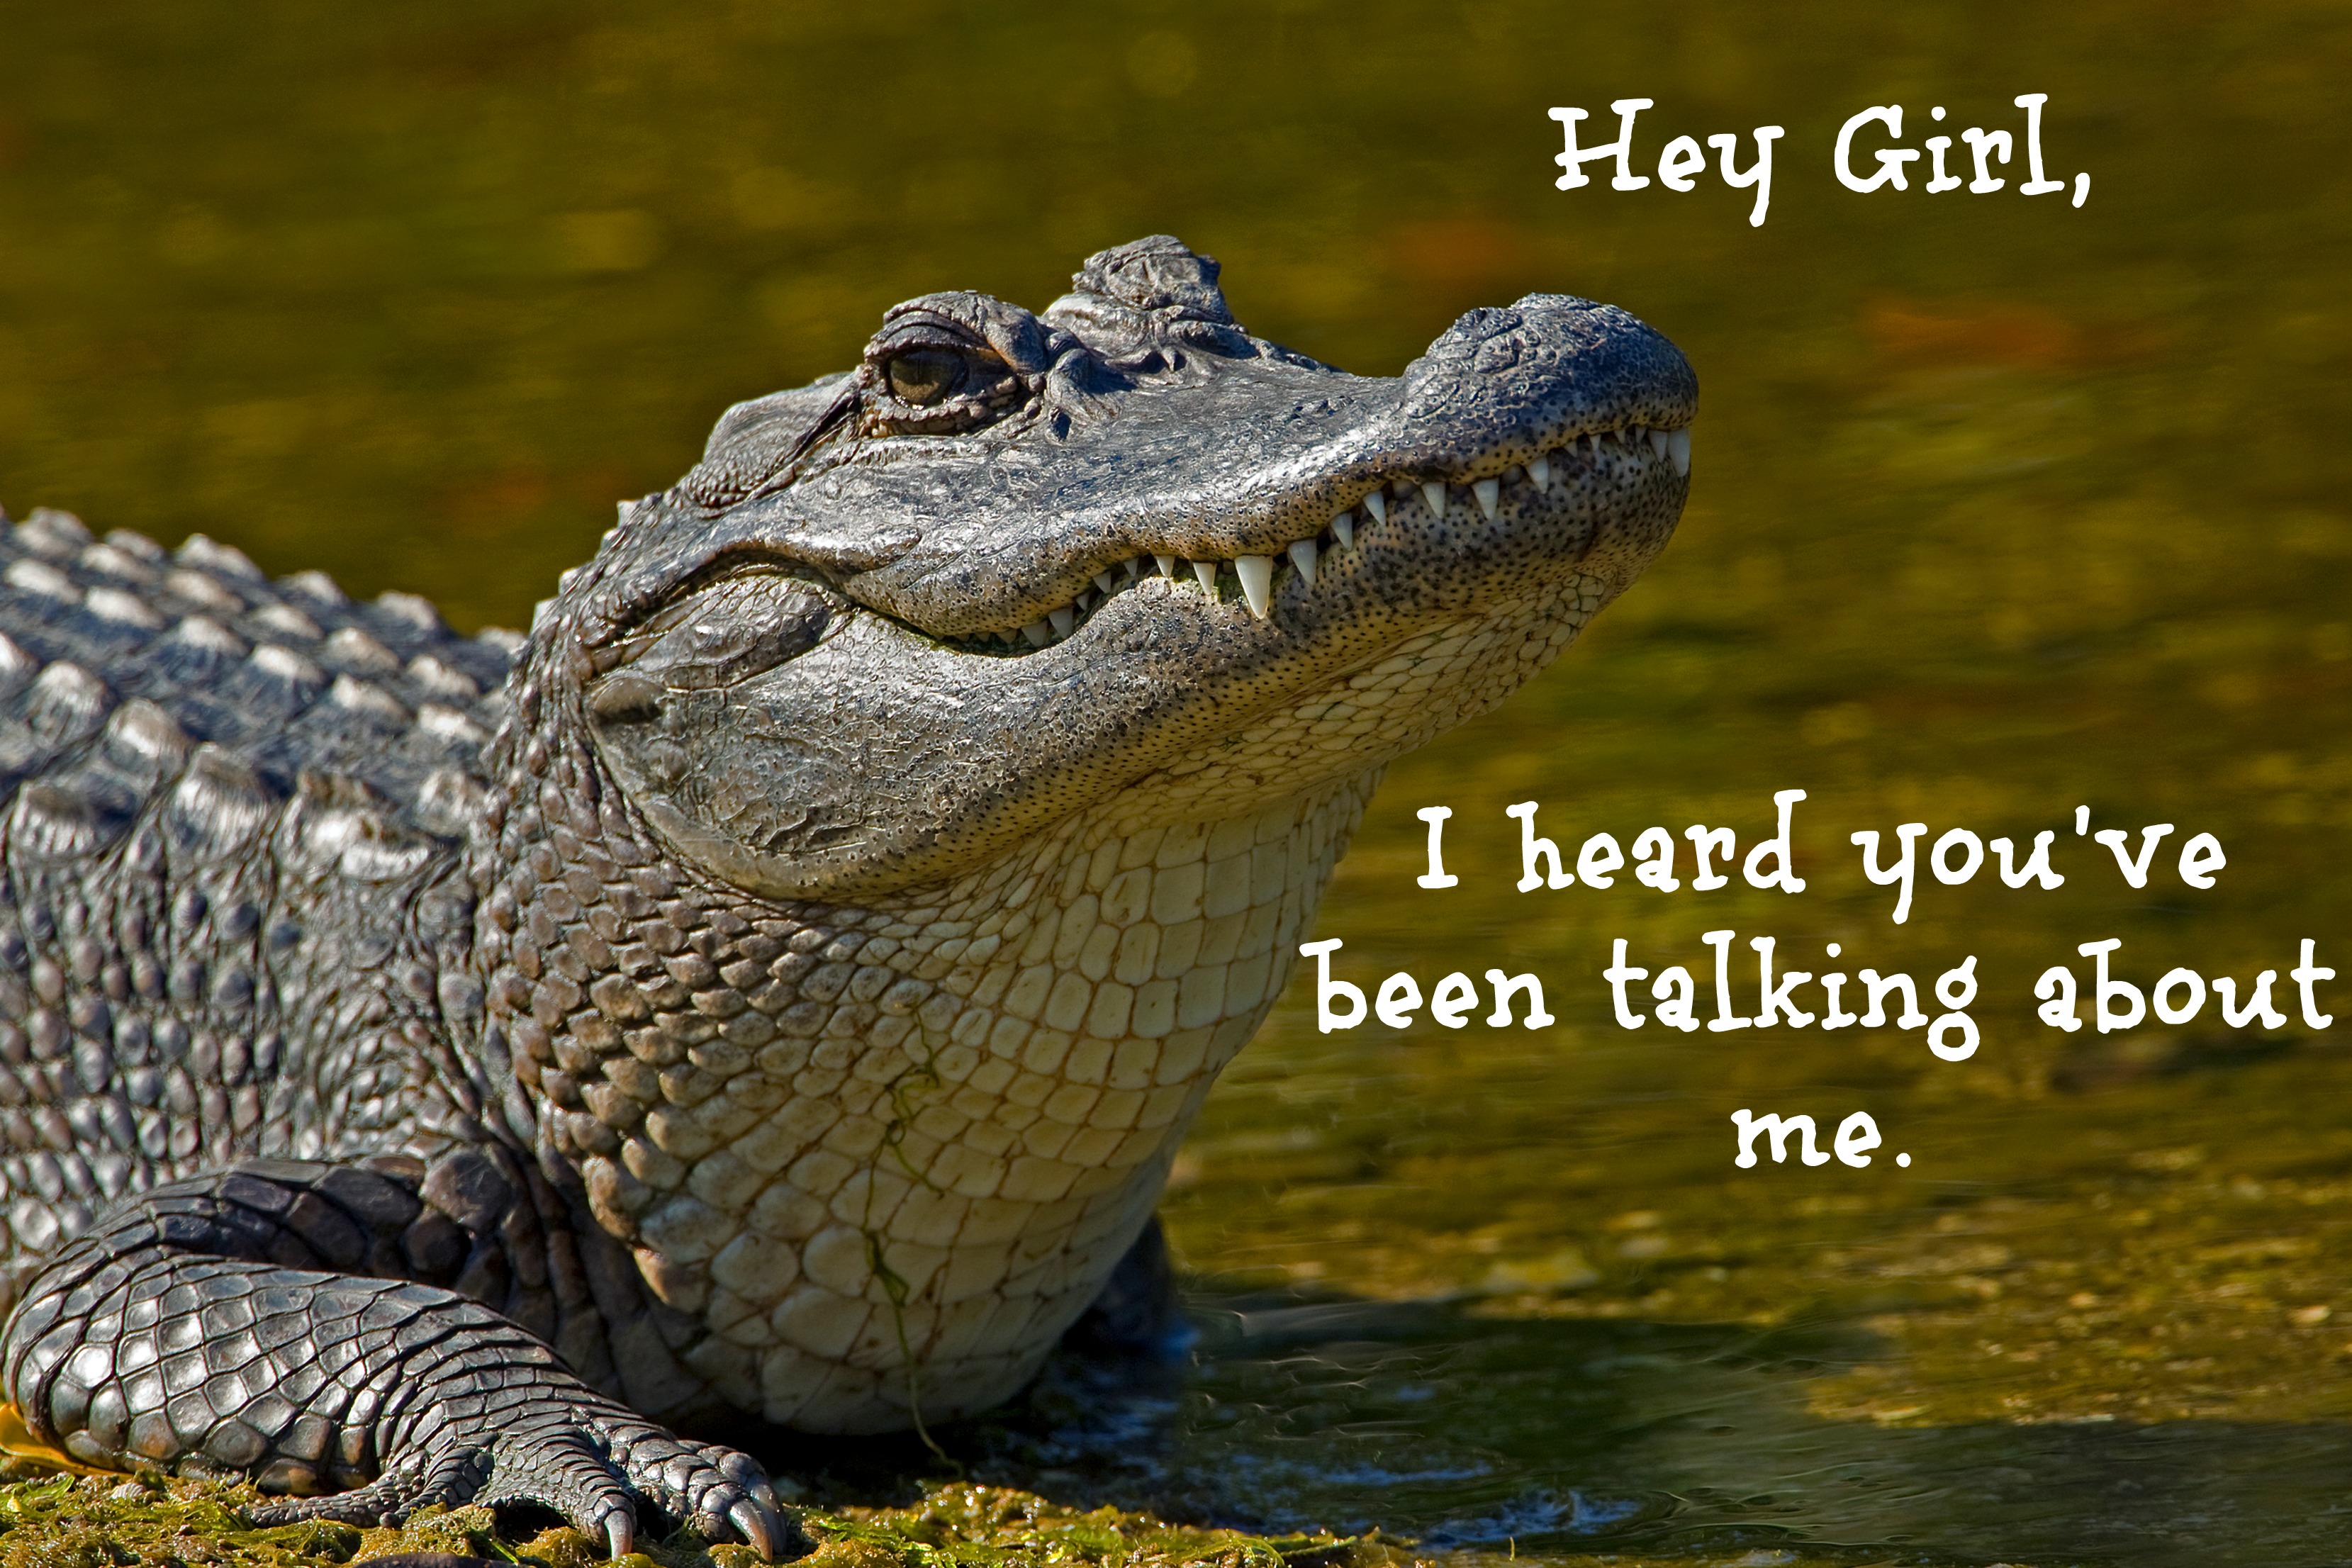 Hey Girl, I heard you've been talking about me.